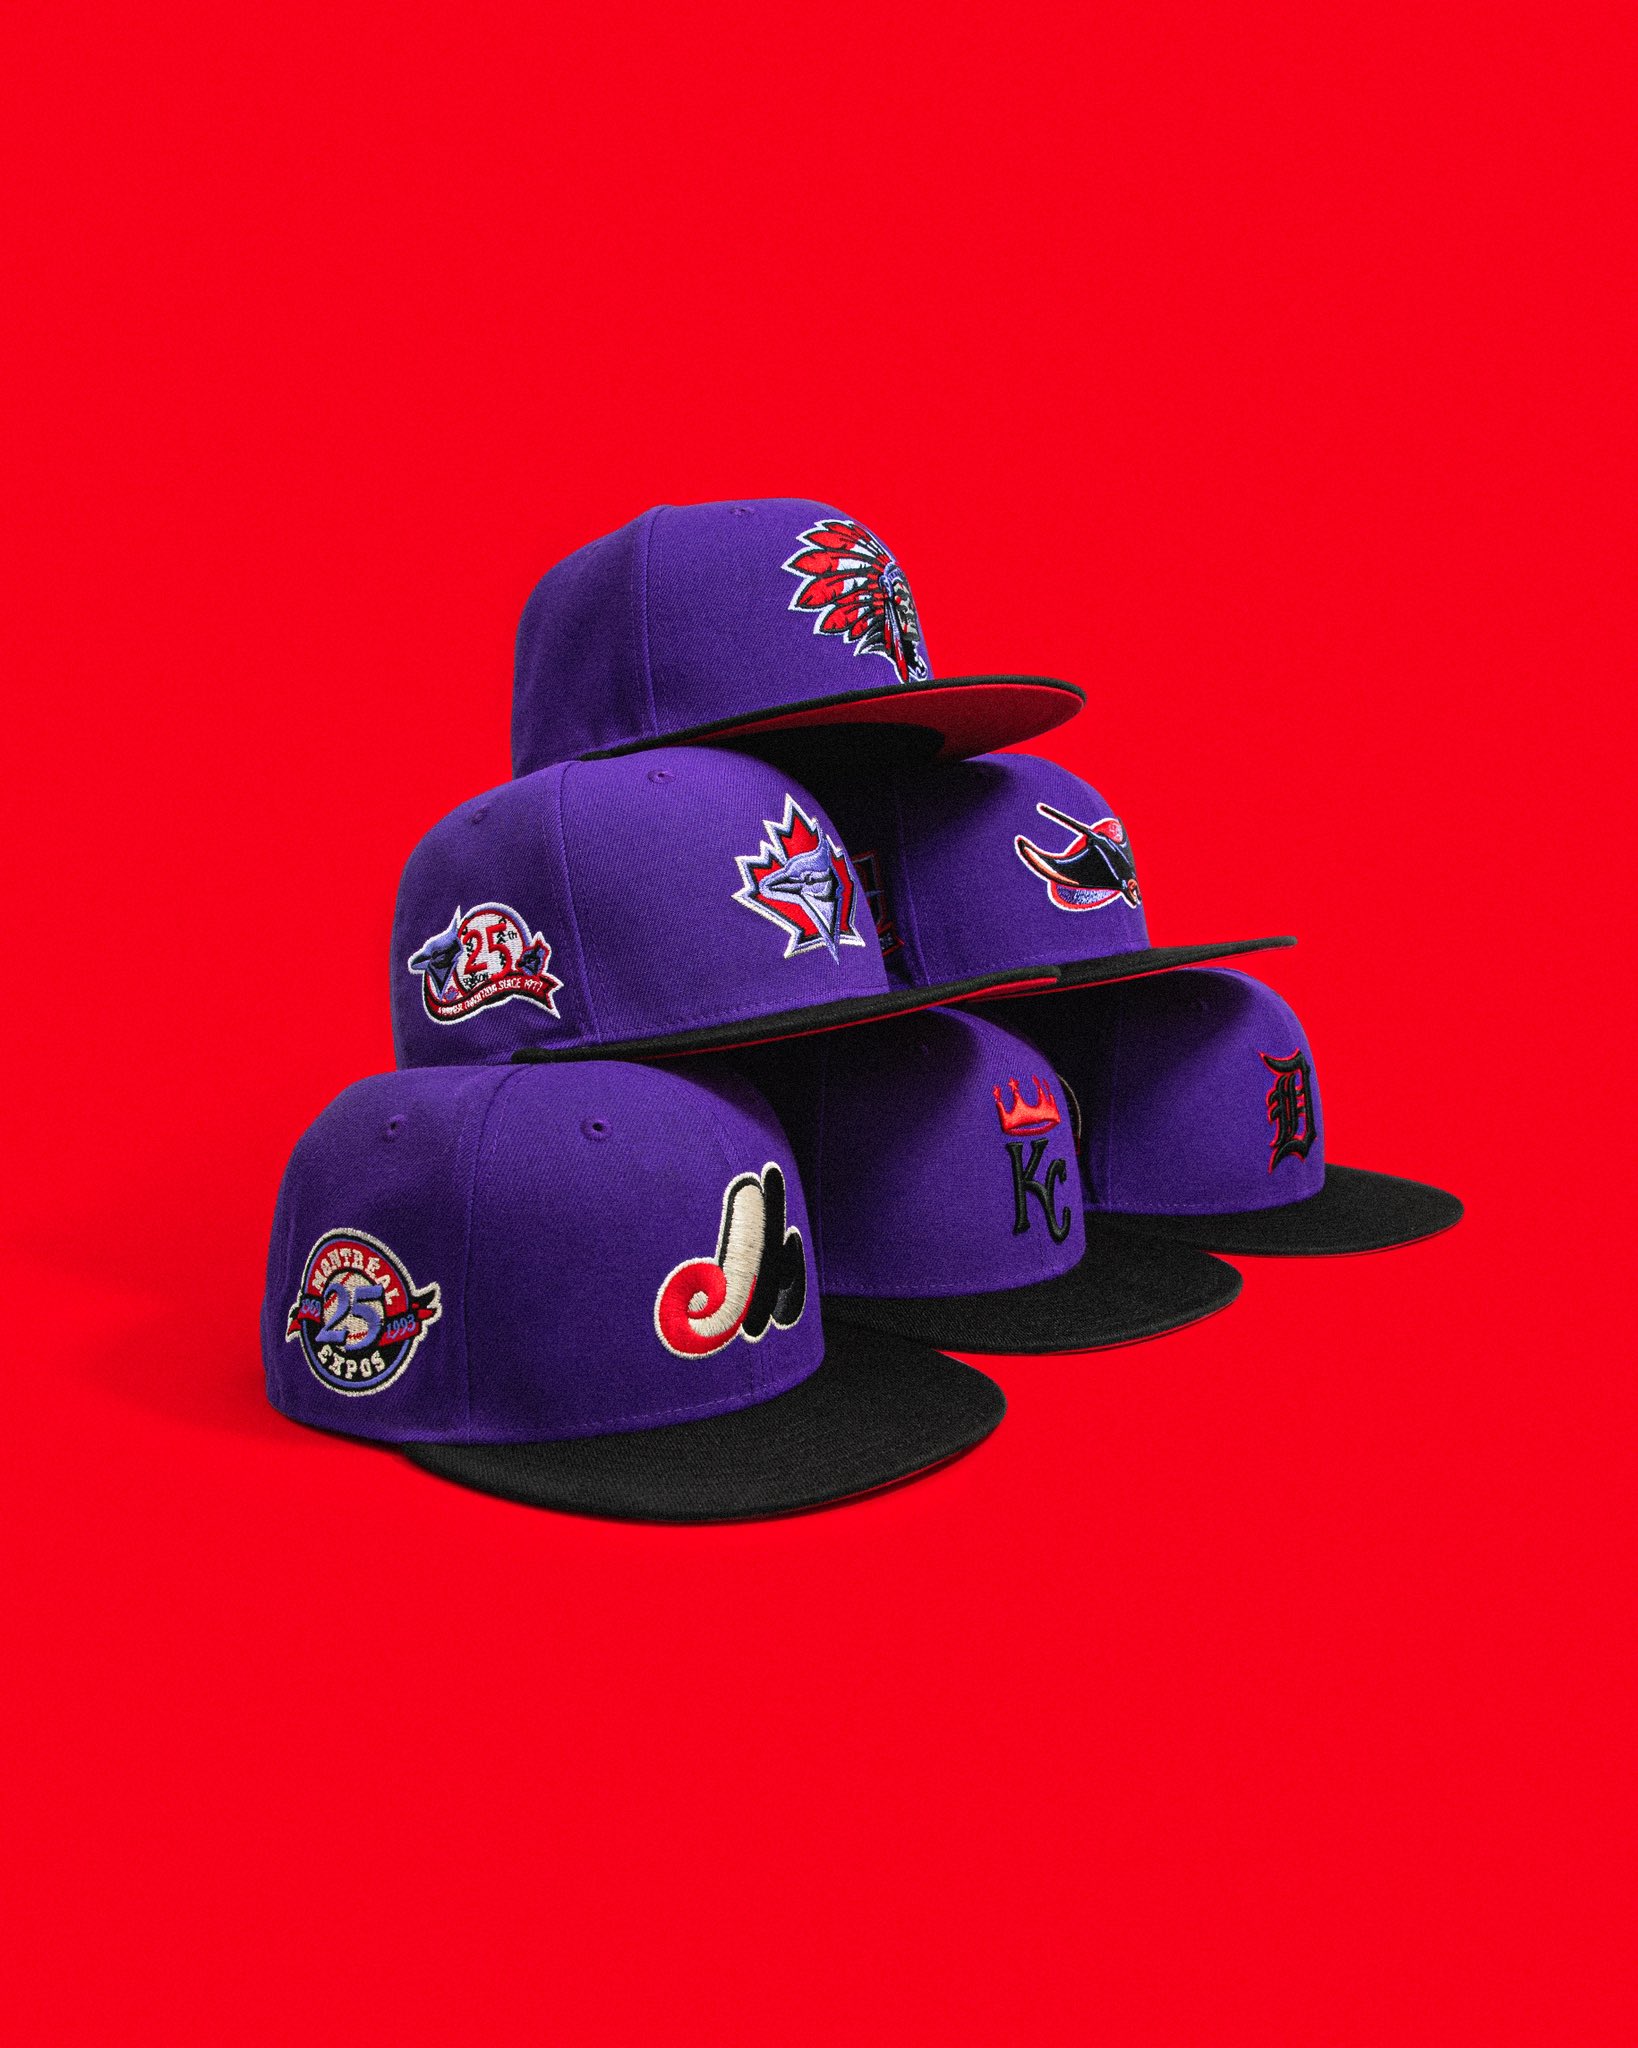 HAT CLUB on X: Next up, and dropping tomorrow morning at 11 AM